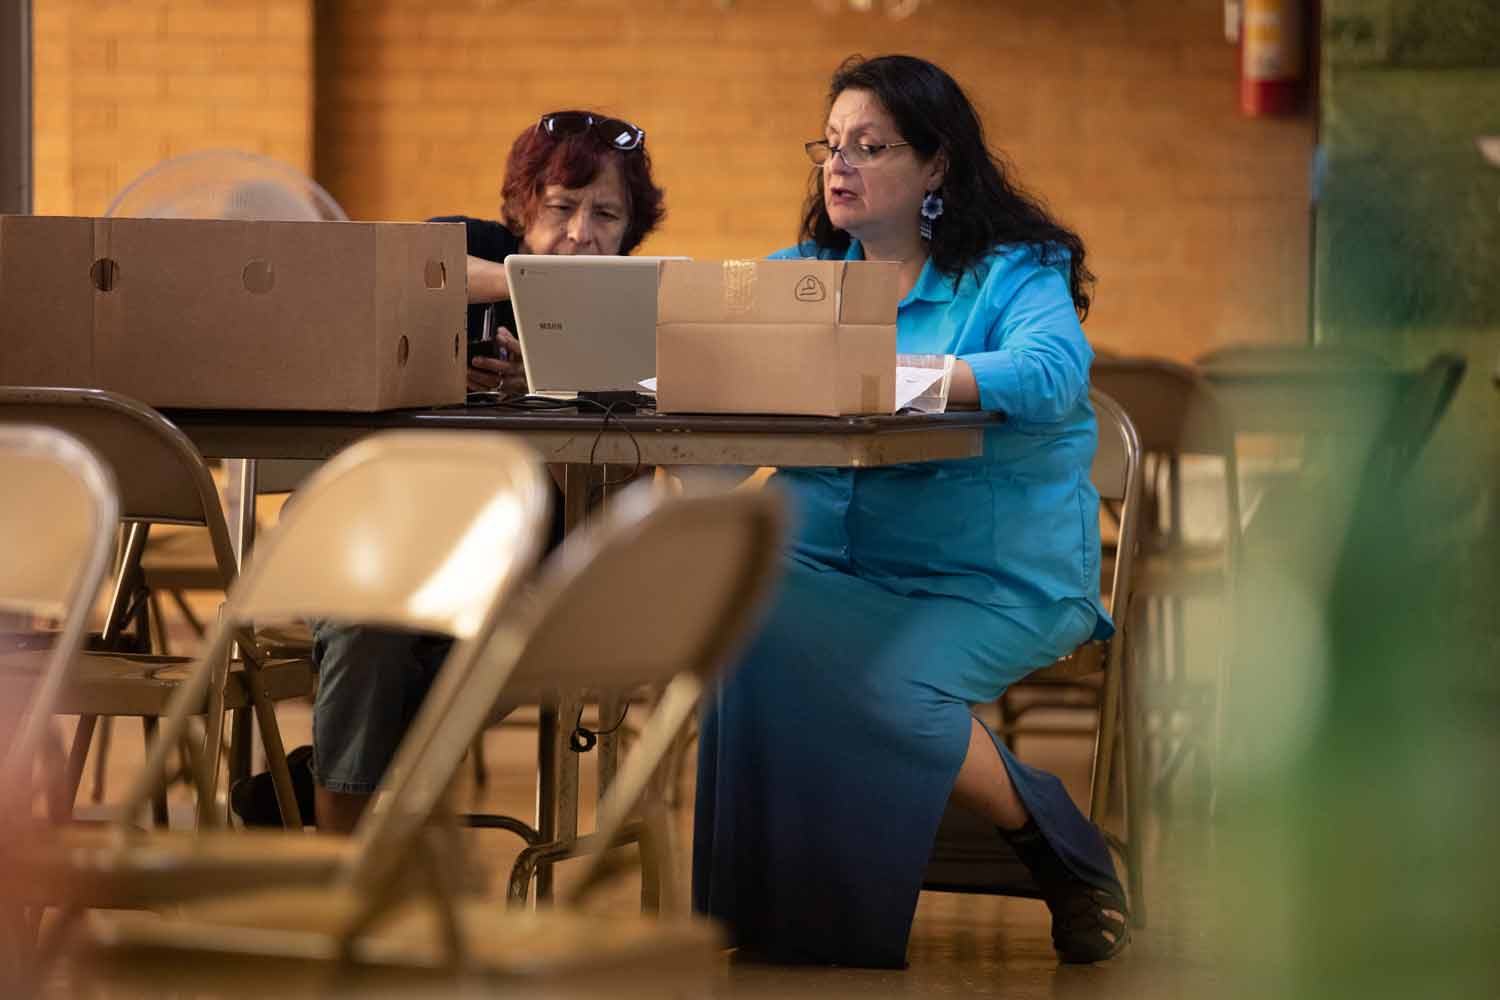 Delia Barajas works on a laptop in a church basement with a volunteer.